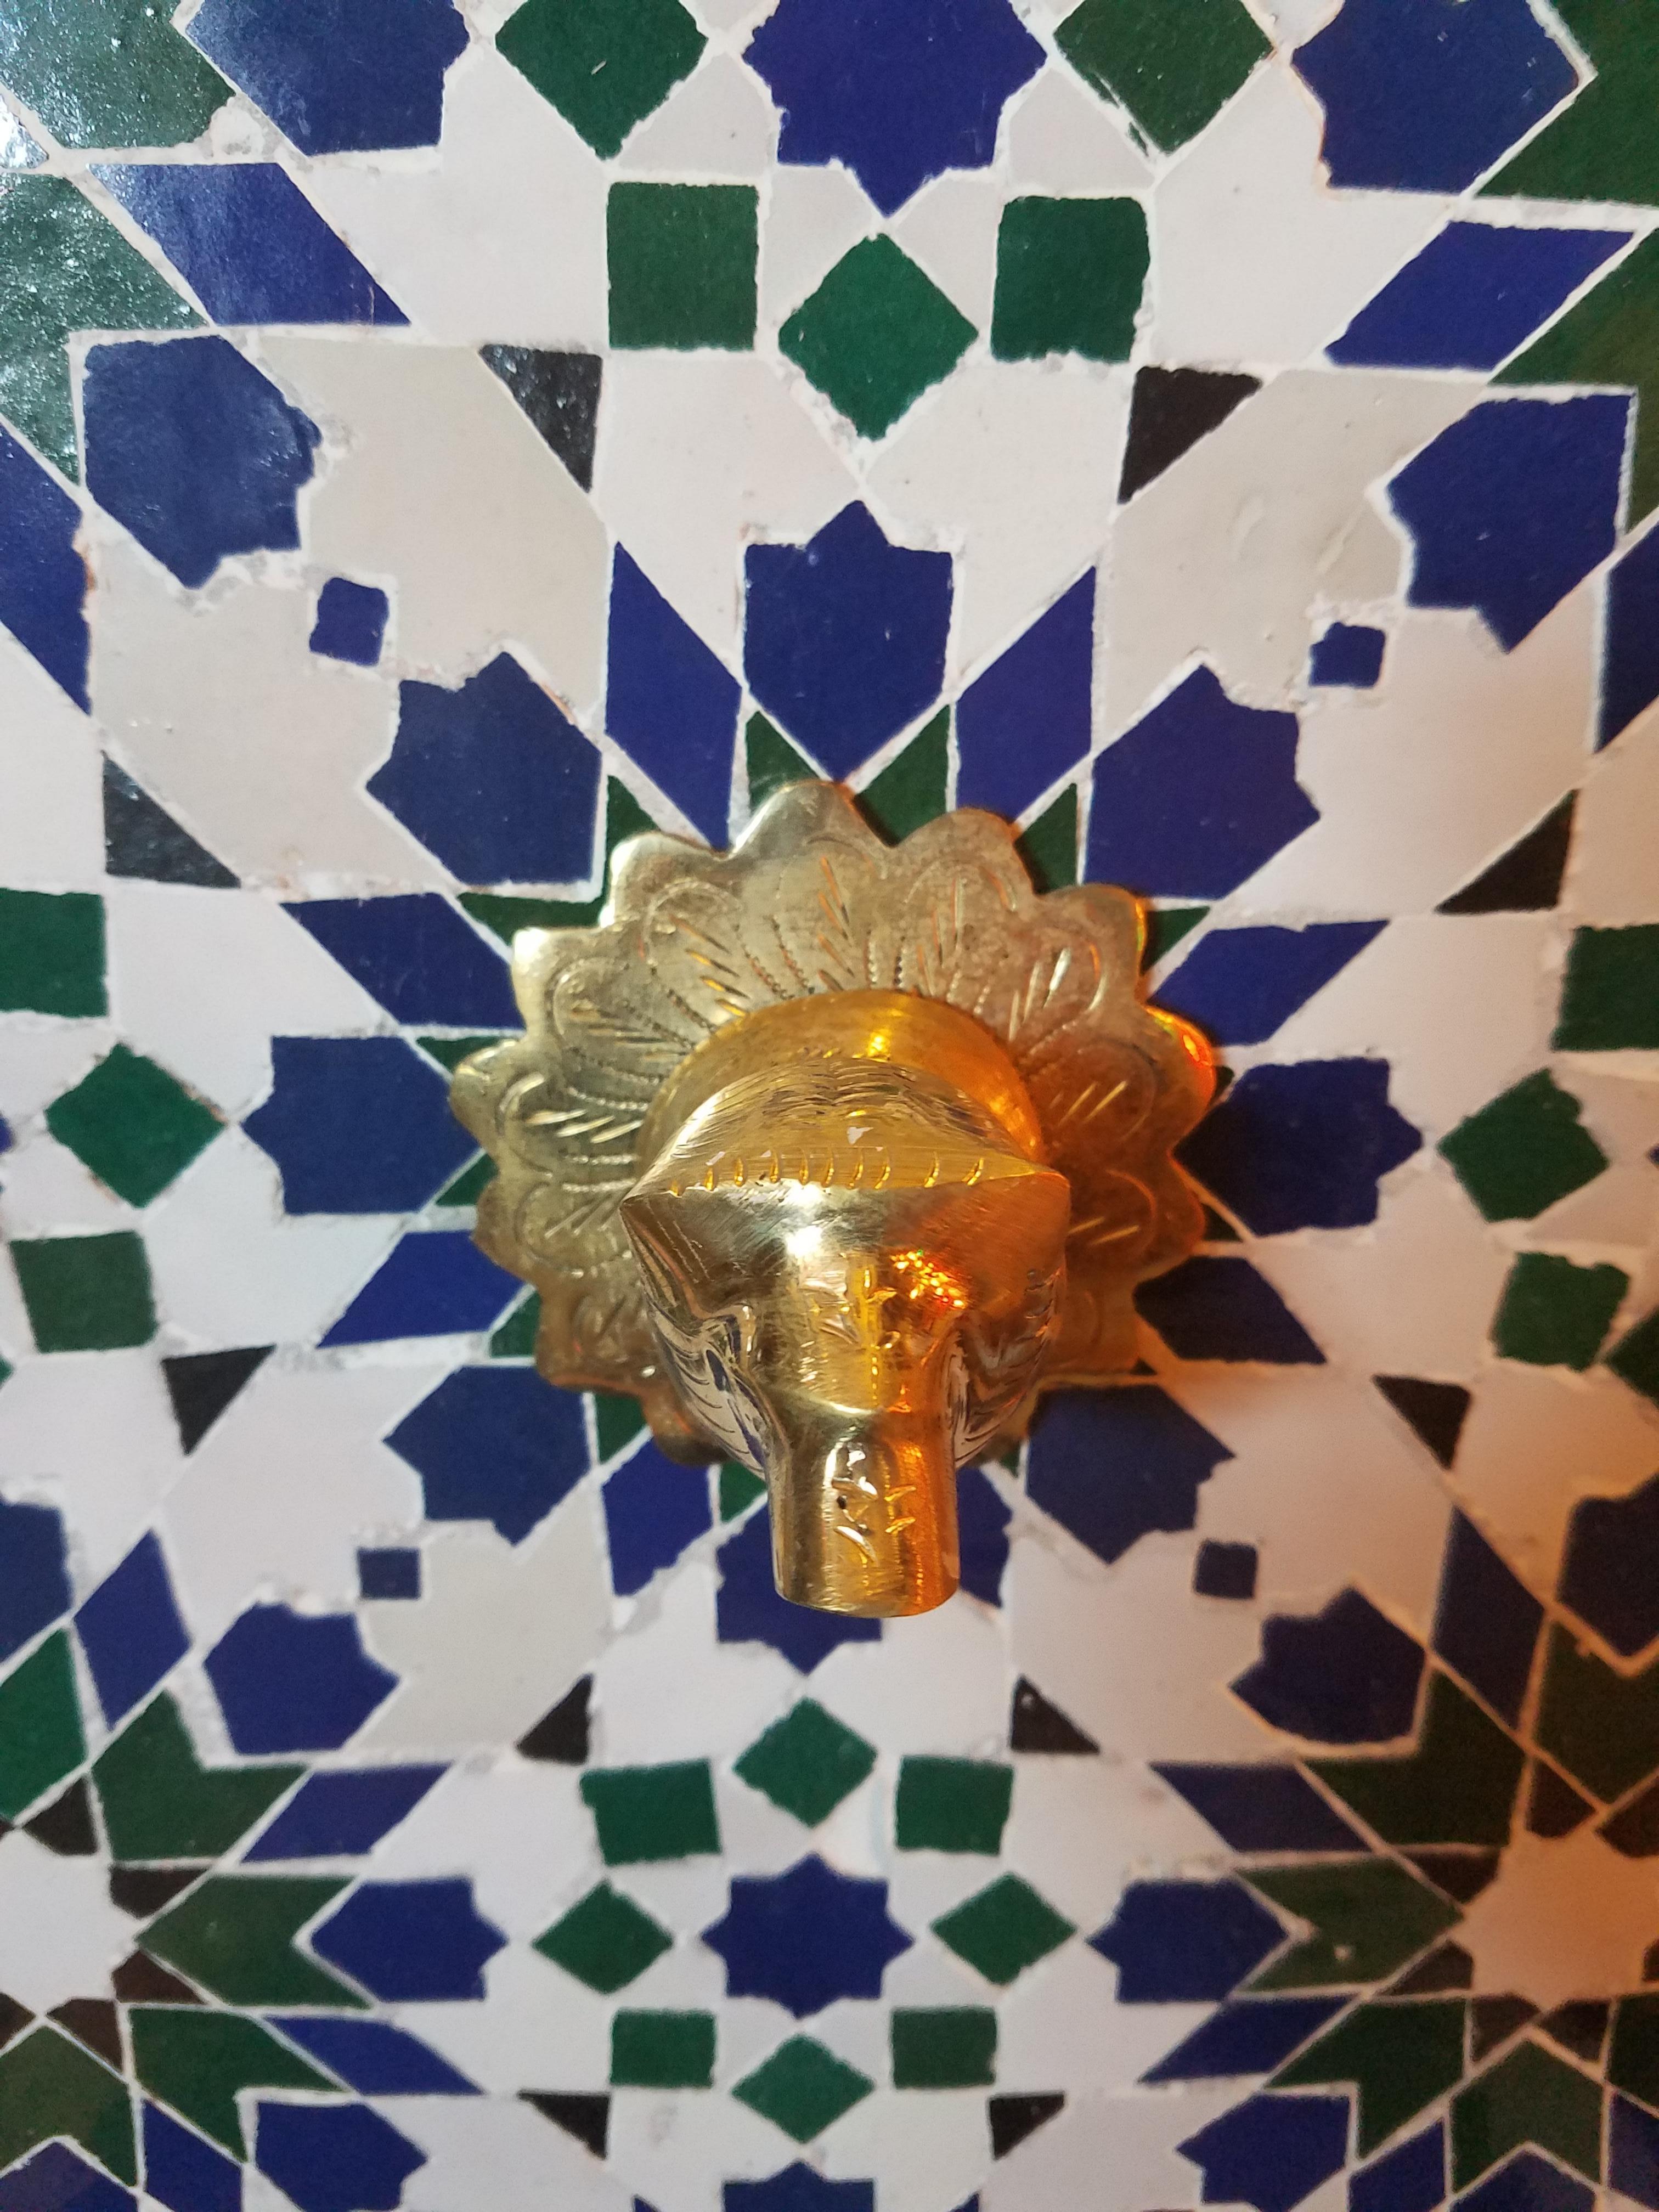 Blue/White/Green Moroccan Mosaic Tile Fountain For Sale 2